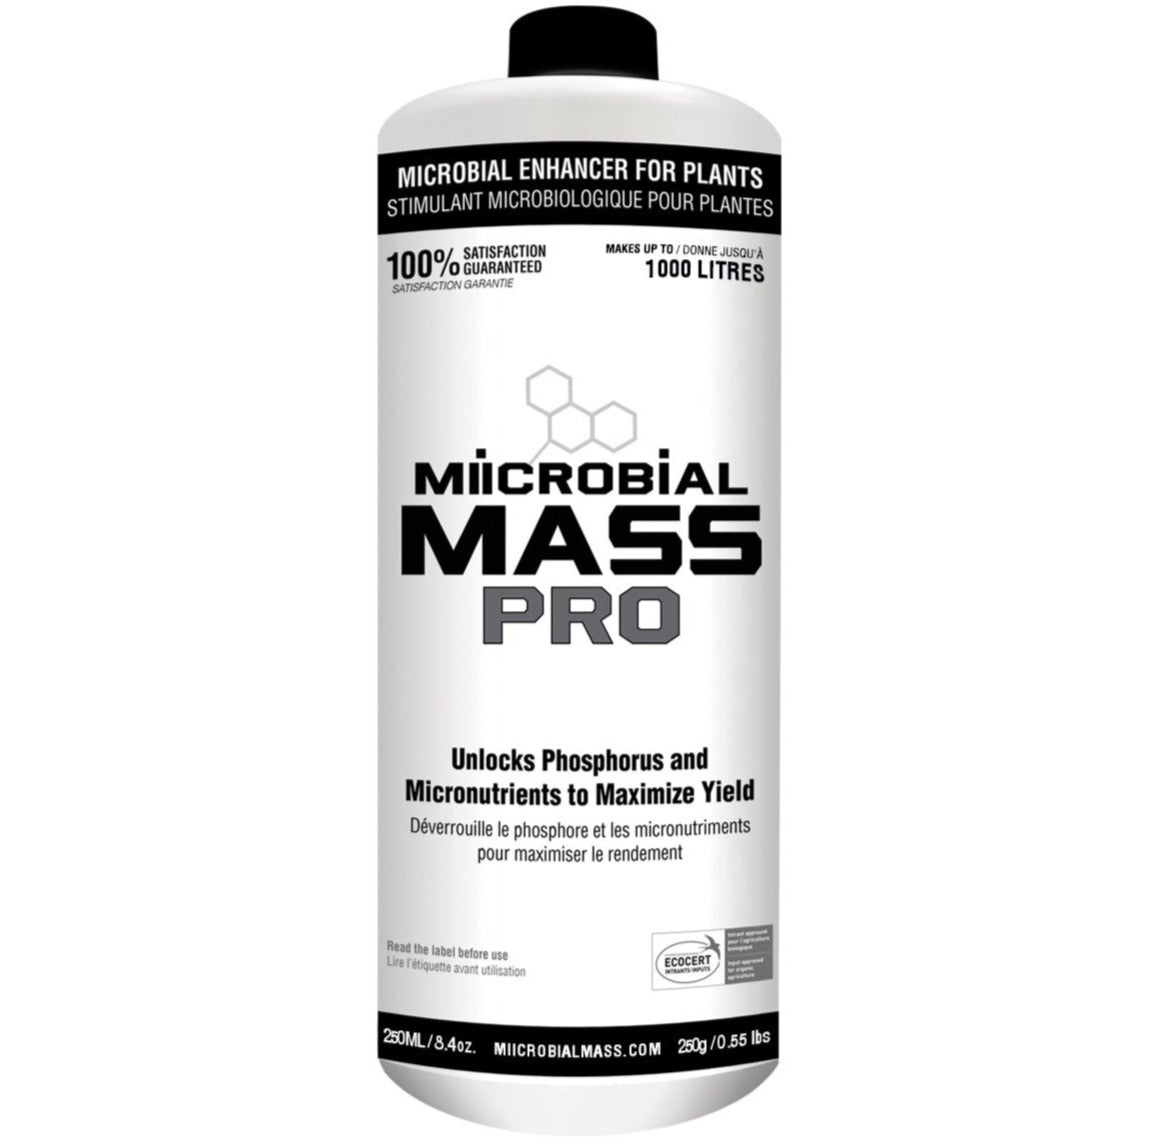 Microbial Mass Pro